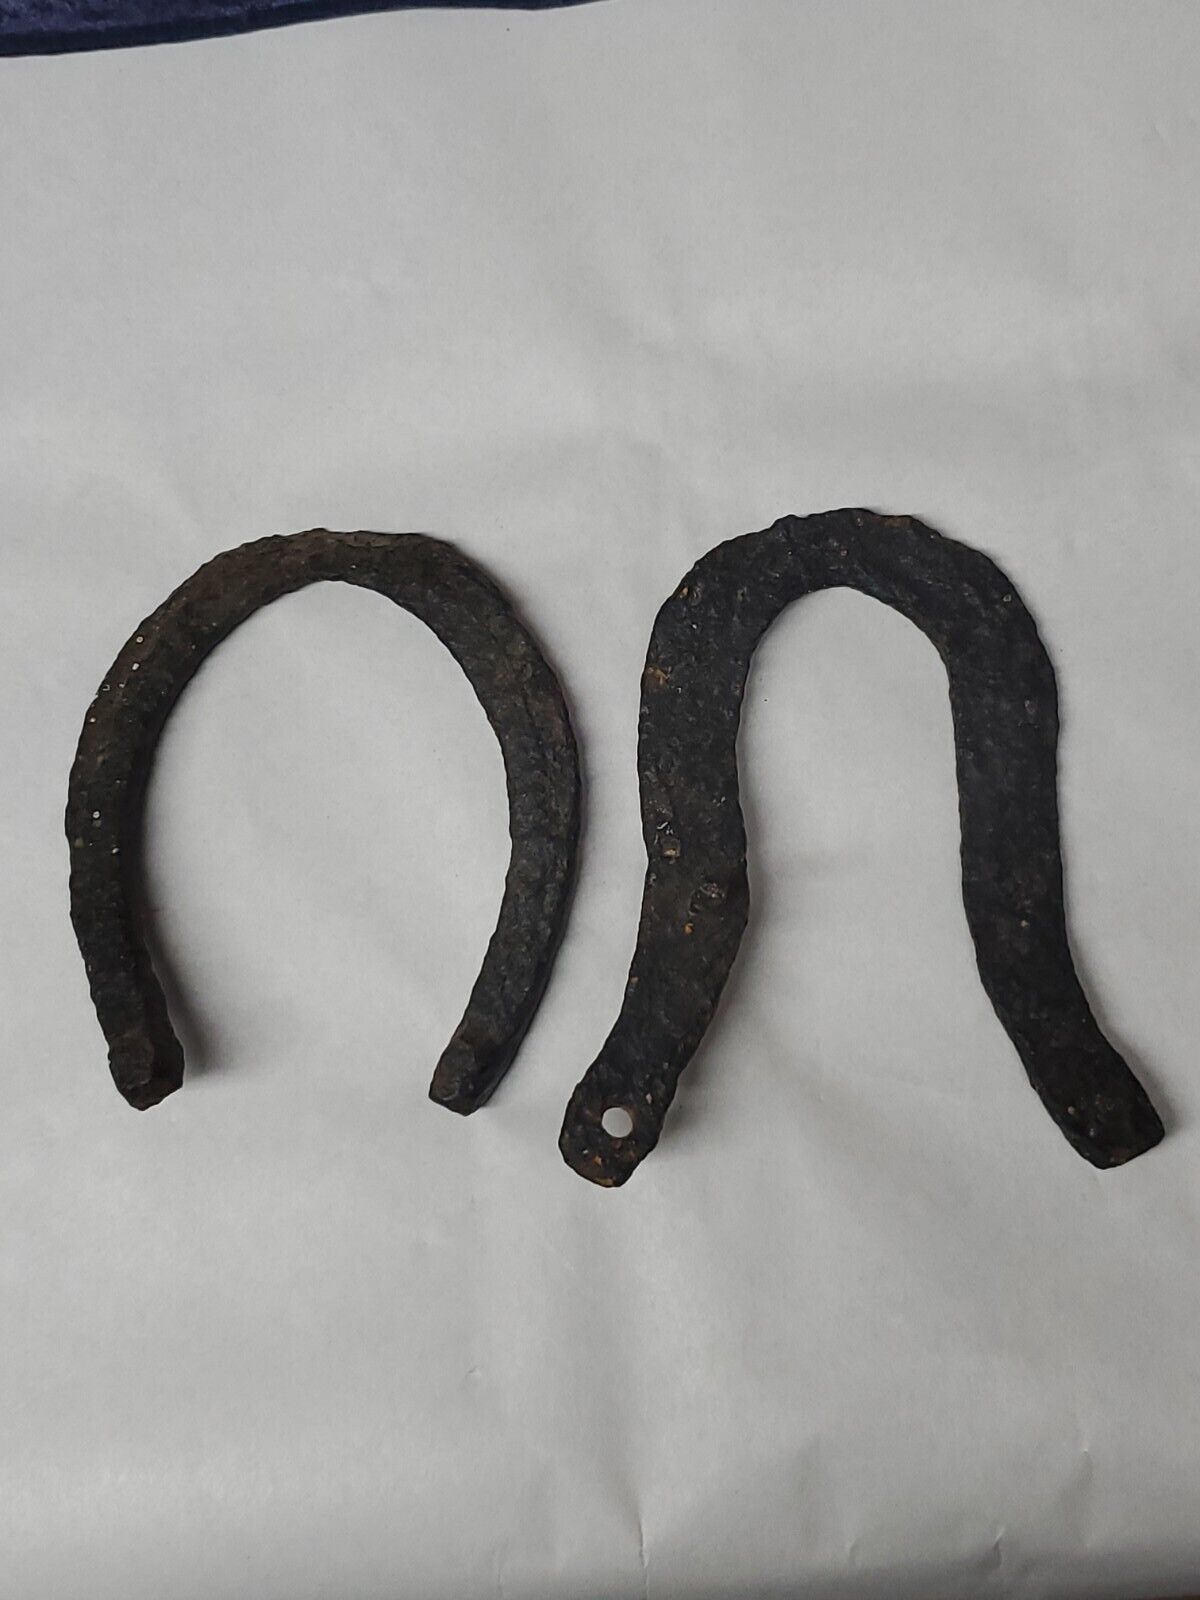 2 RUSTY Rustic Antique Authentic Horse Pony Shoes Horseshoes Probably Unearthed